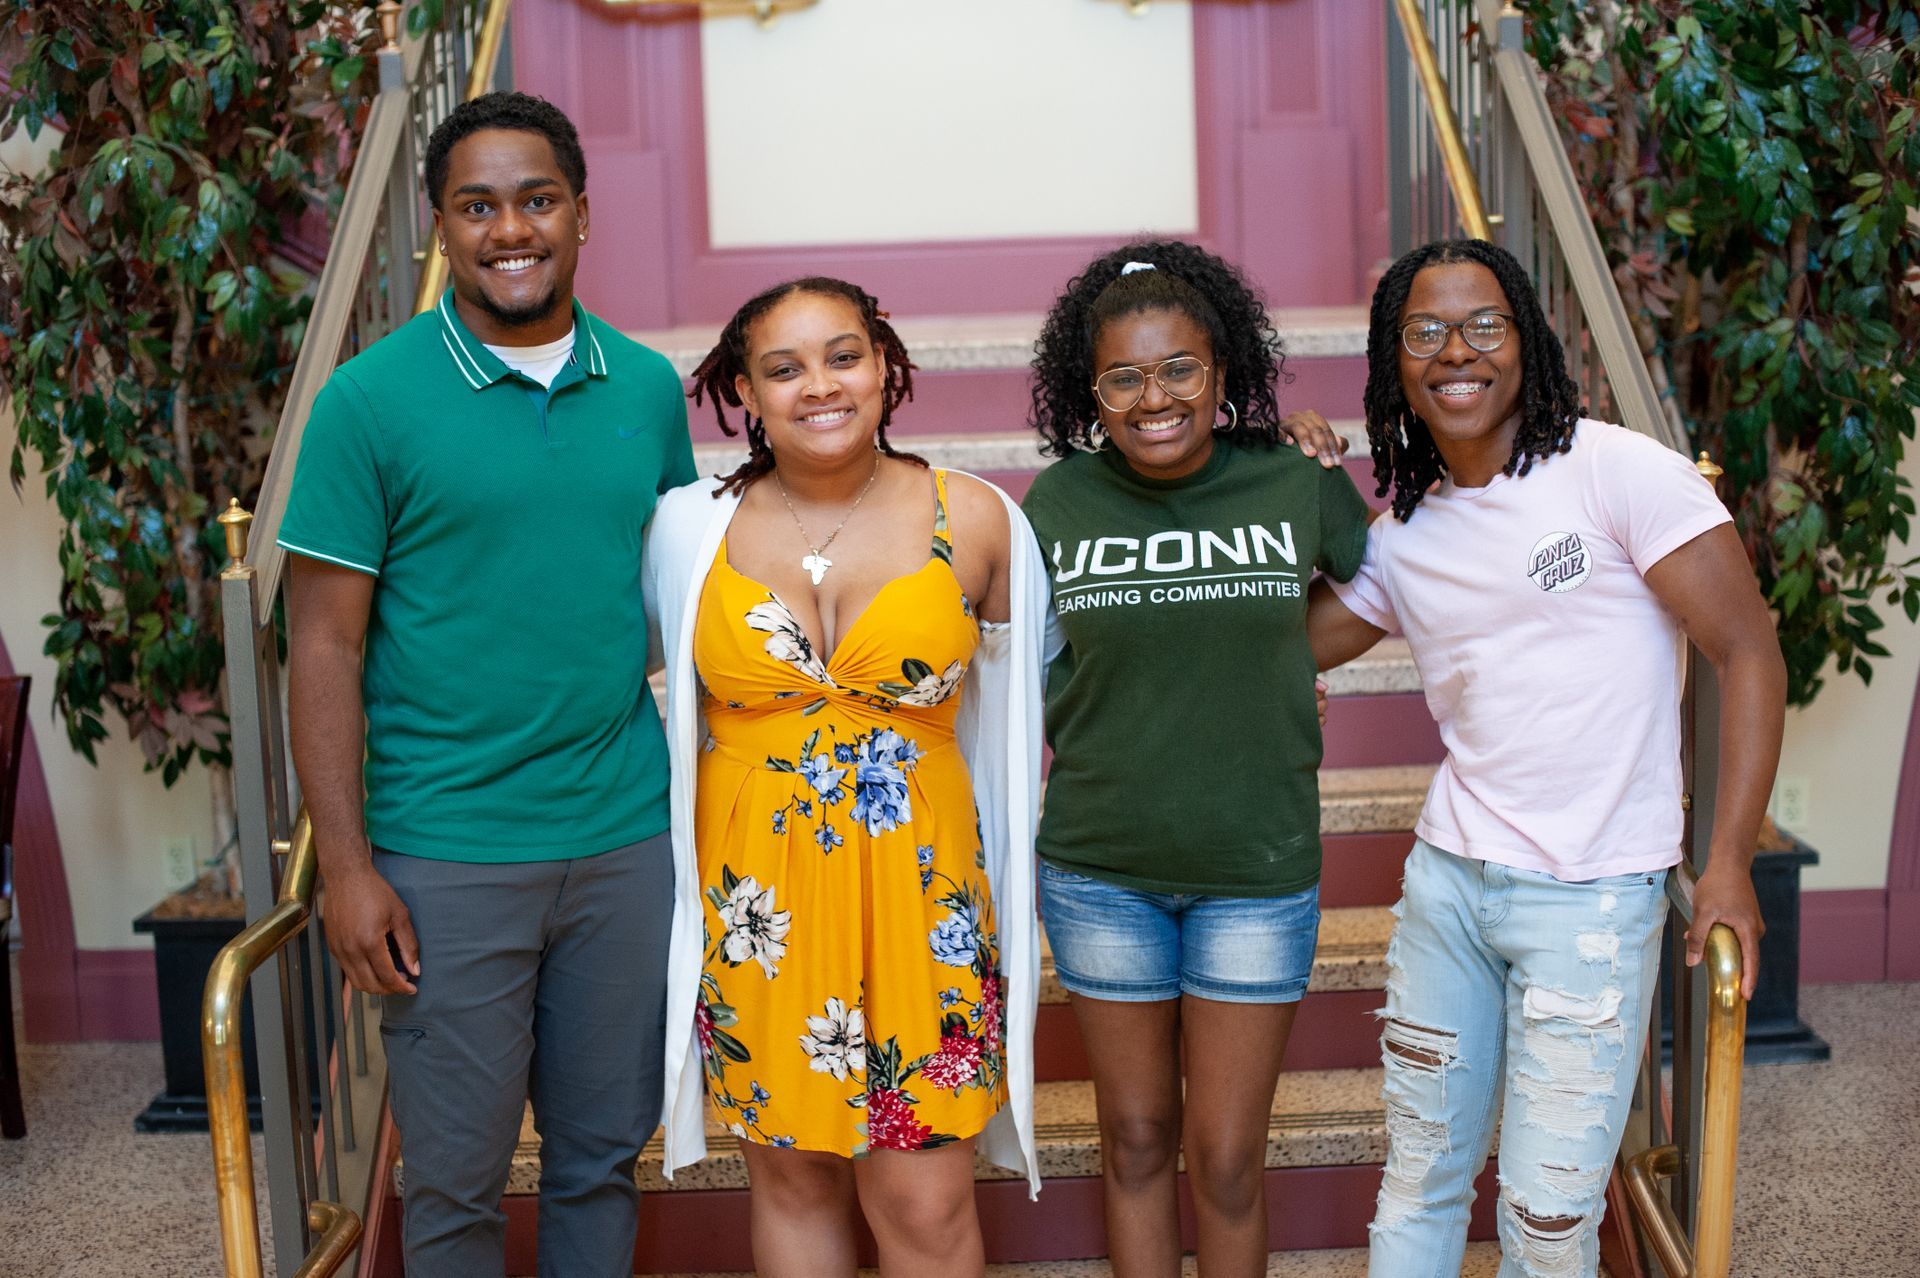 Devin Hill, pictured far left, alongside fellow Scholars: Shawni Jacobs, Jasmine Morris, and A'Jahni Barclay. 